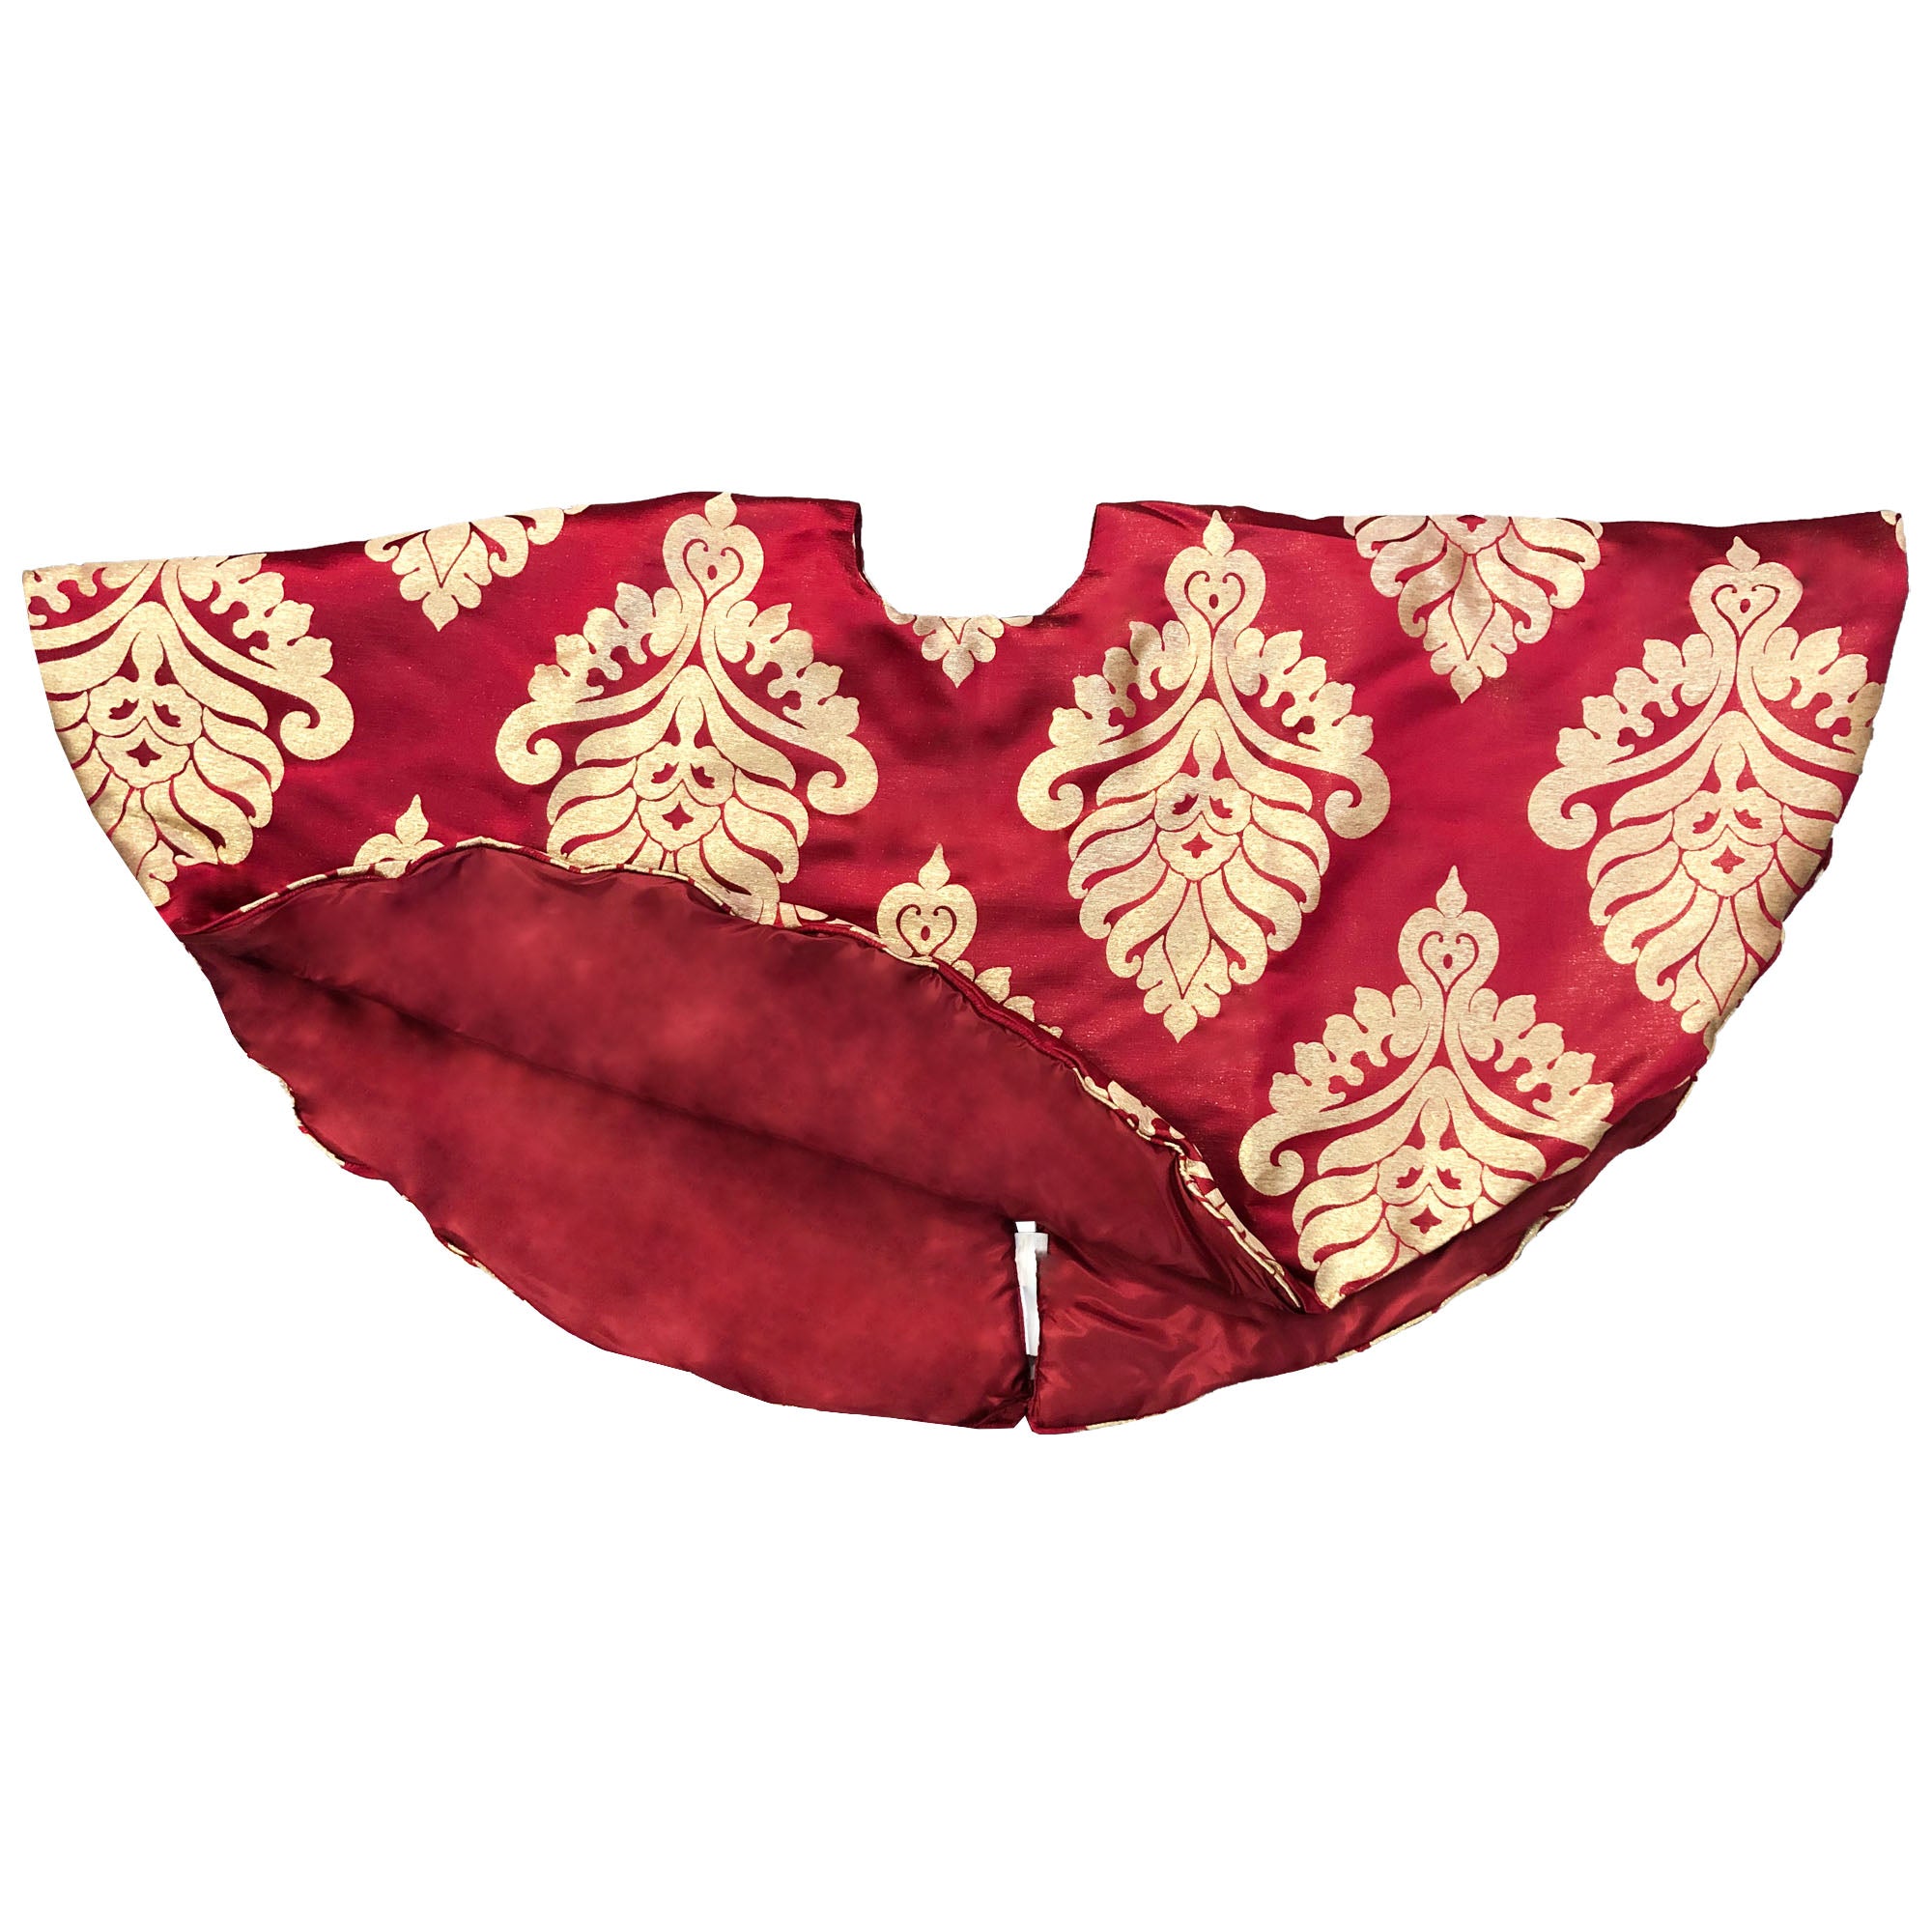 Rowley Christmas Tree Skirt | Color Red & Gold